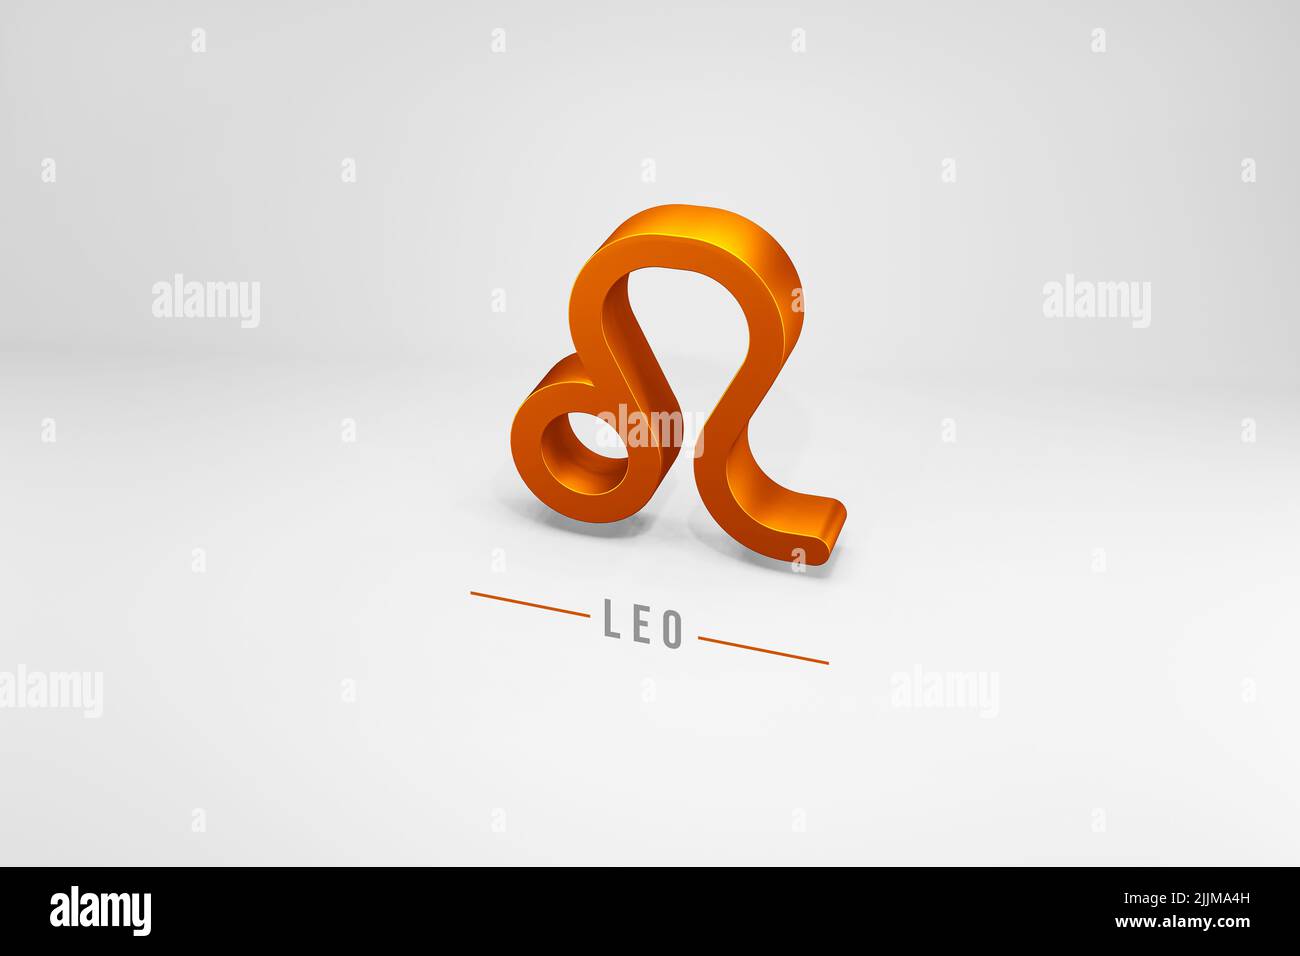 Leo golden zodiac sign, Golden zodiac sign Leo 3D rendering isolated on white background Stock Photo